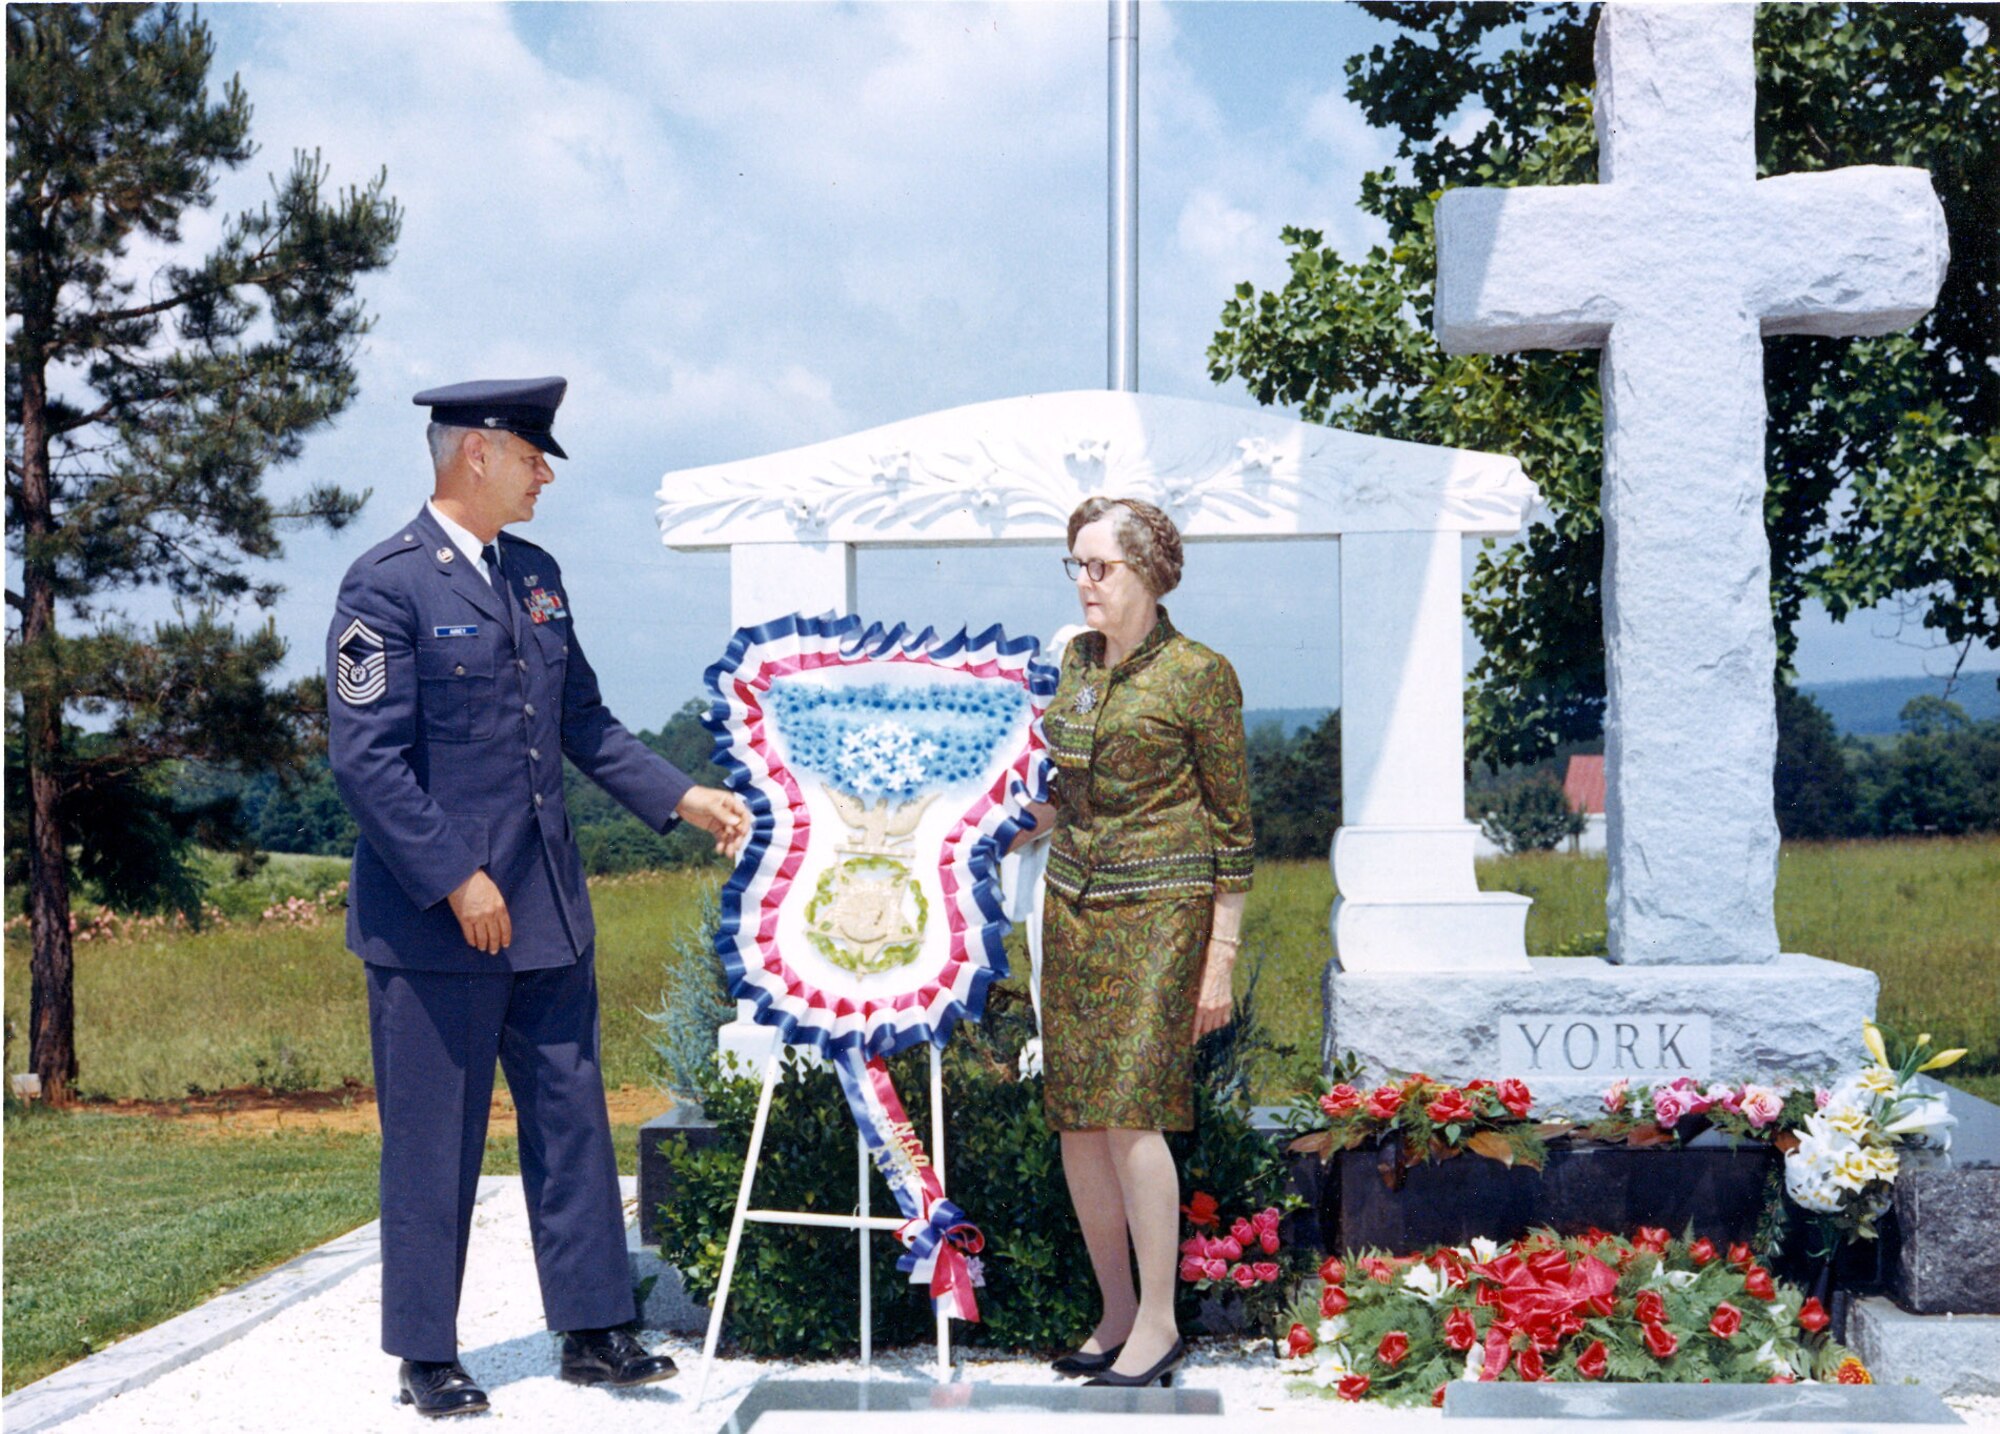 Chief Master Sergeant of the Air Force Paul Airey meets Mrs. Alvin C. York and places wreath on her husband's grave site during ceremonies honoring the World War I hero.  Chief Airey was selected as the first chief master sergeant of the Air Force on April 3, 1967.  During his tenure he visited many bases and talked with many Airmen about improving conditions for the enlisted force.  (U.S. Air Force file photo)